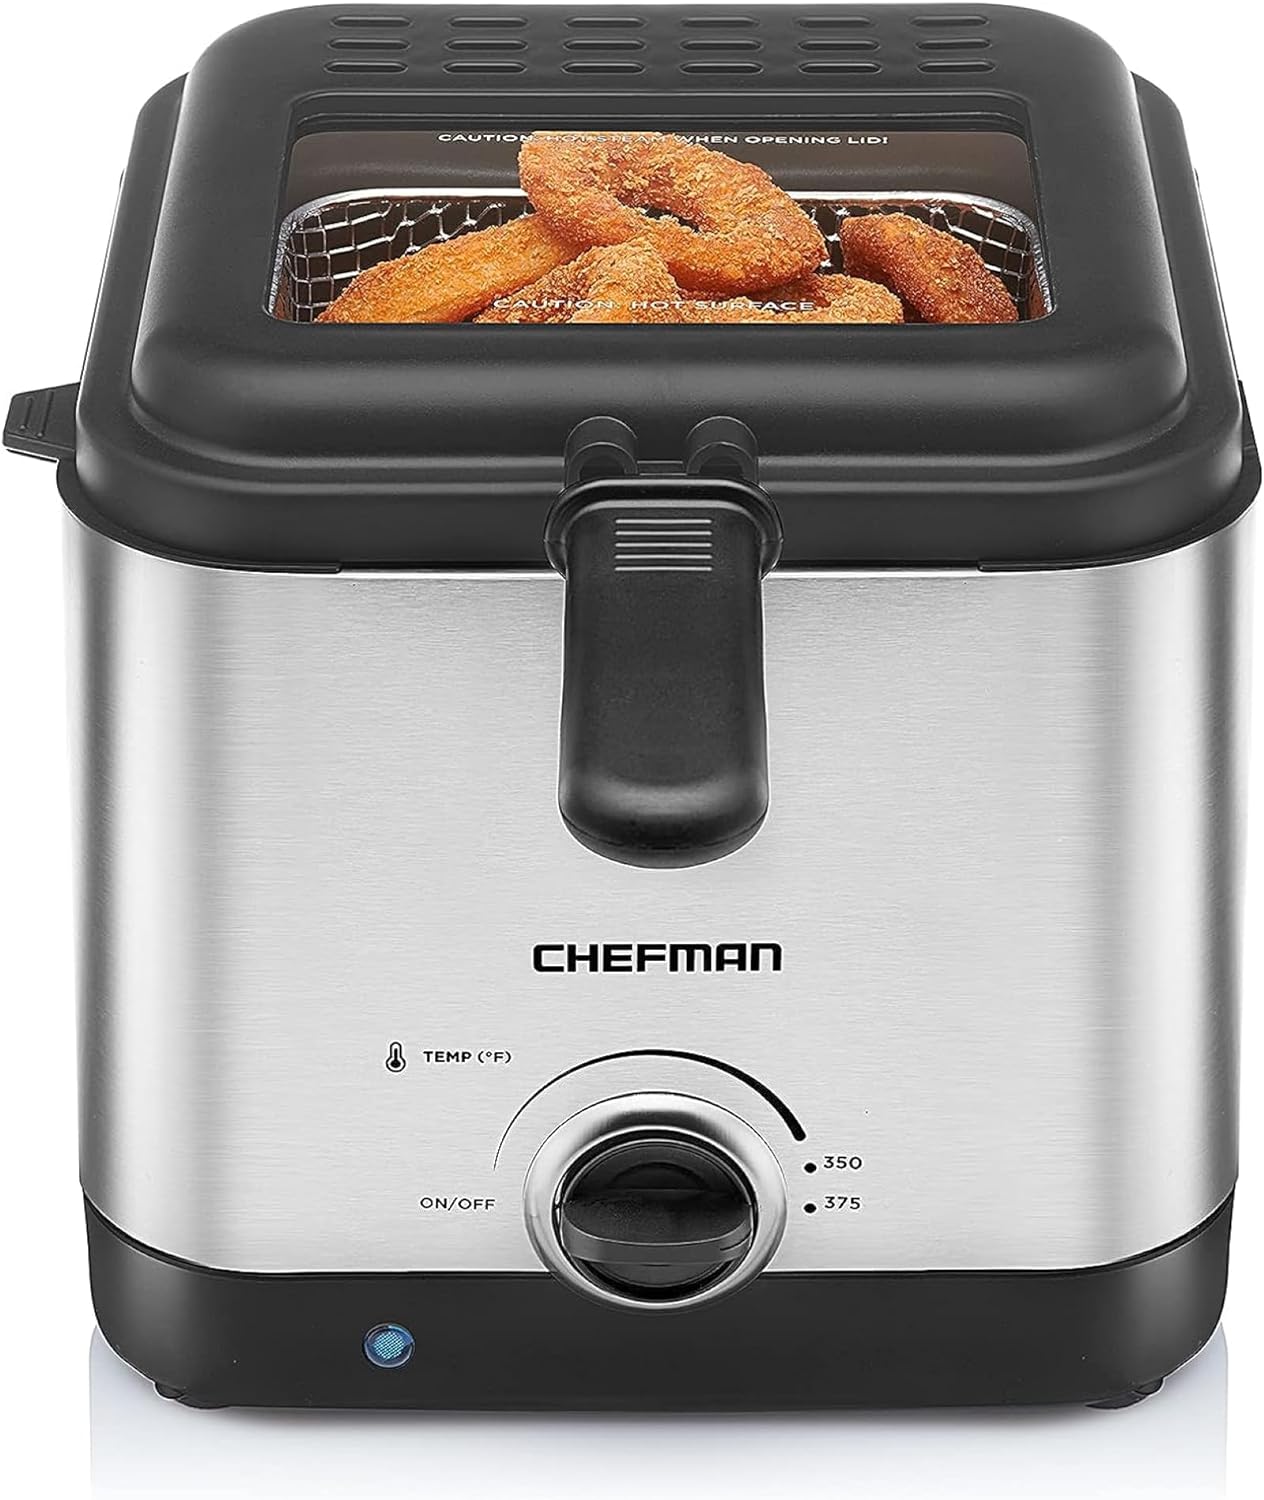 Chefman Fry Guy, The Most Compact  Convenient To Deep Fry Comfort Food, Restaurant-Style Basket With A 1.6-Quart Capacity, Easy-View Window  Adjustable Temp Control, Stainless - 1.5 Liter